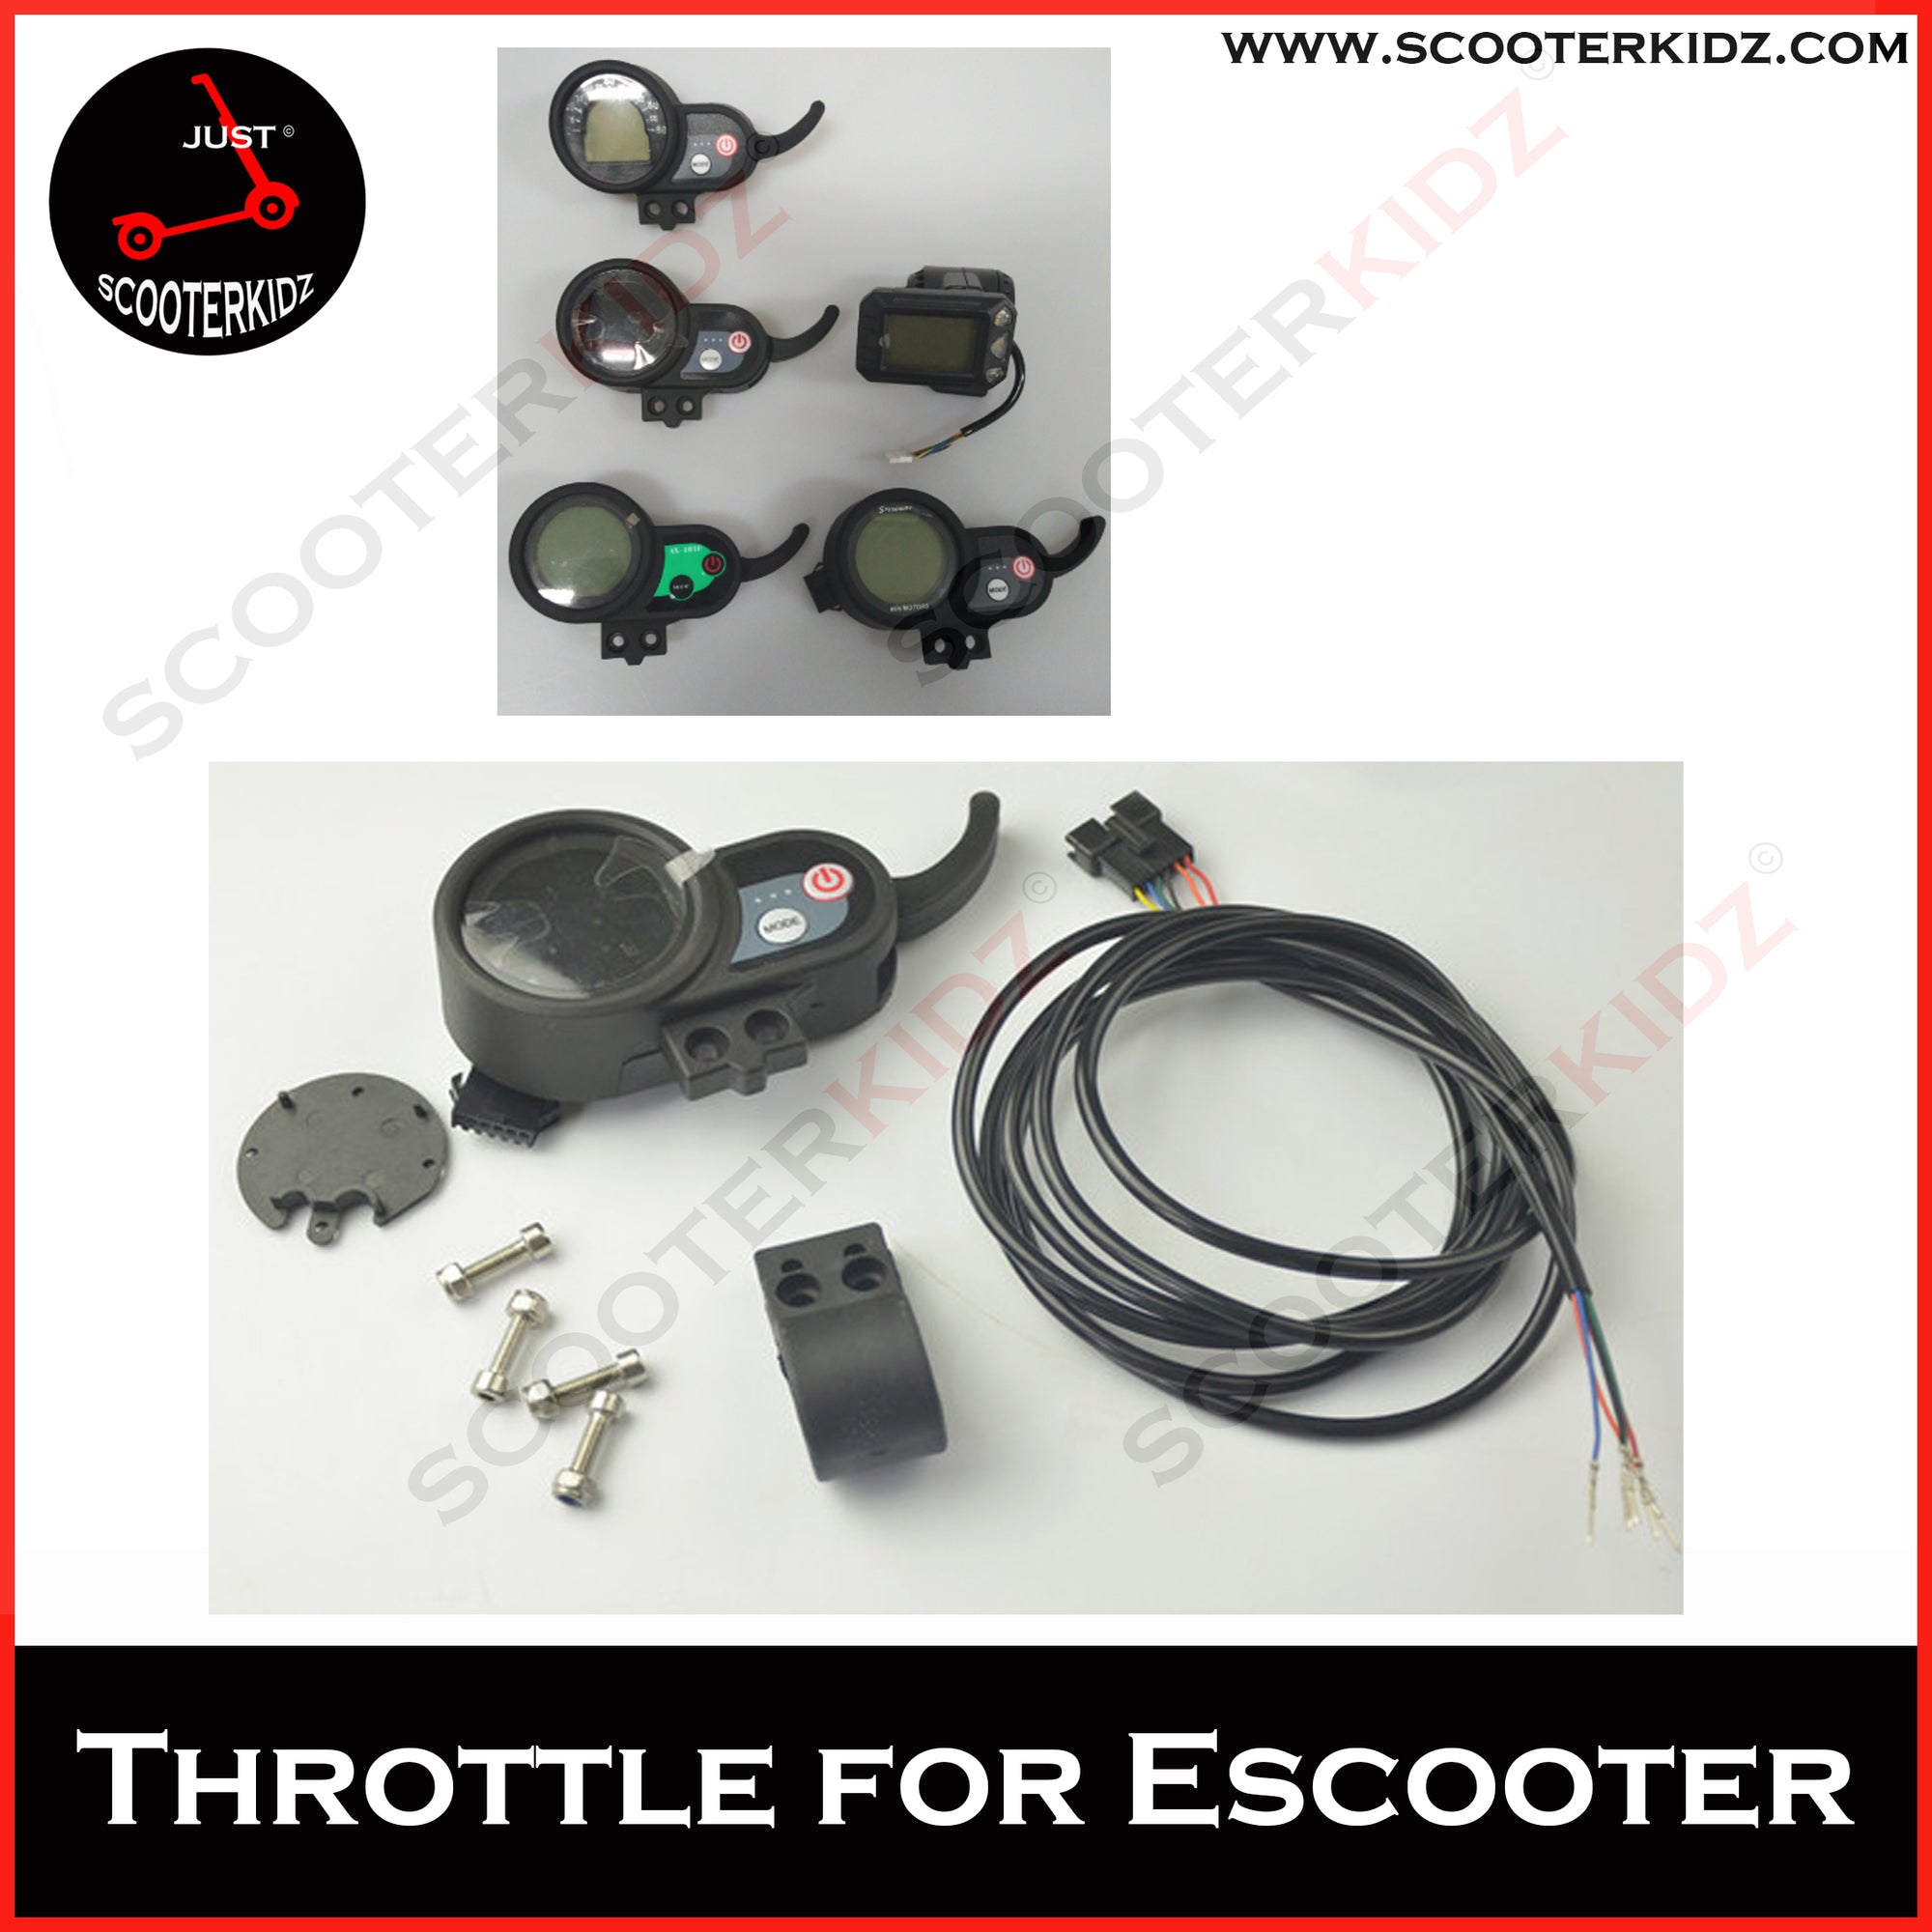 Throttle for All Electric Scooter